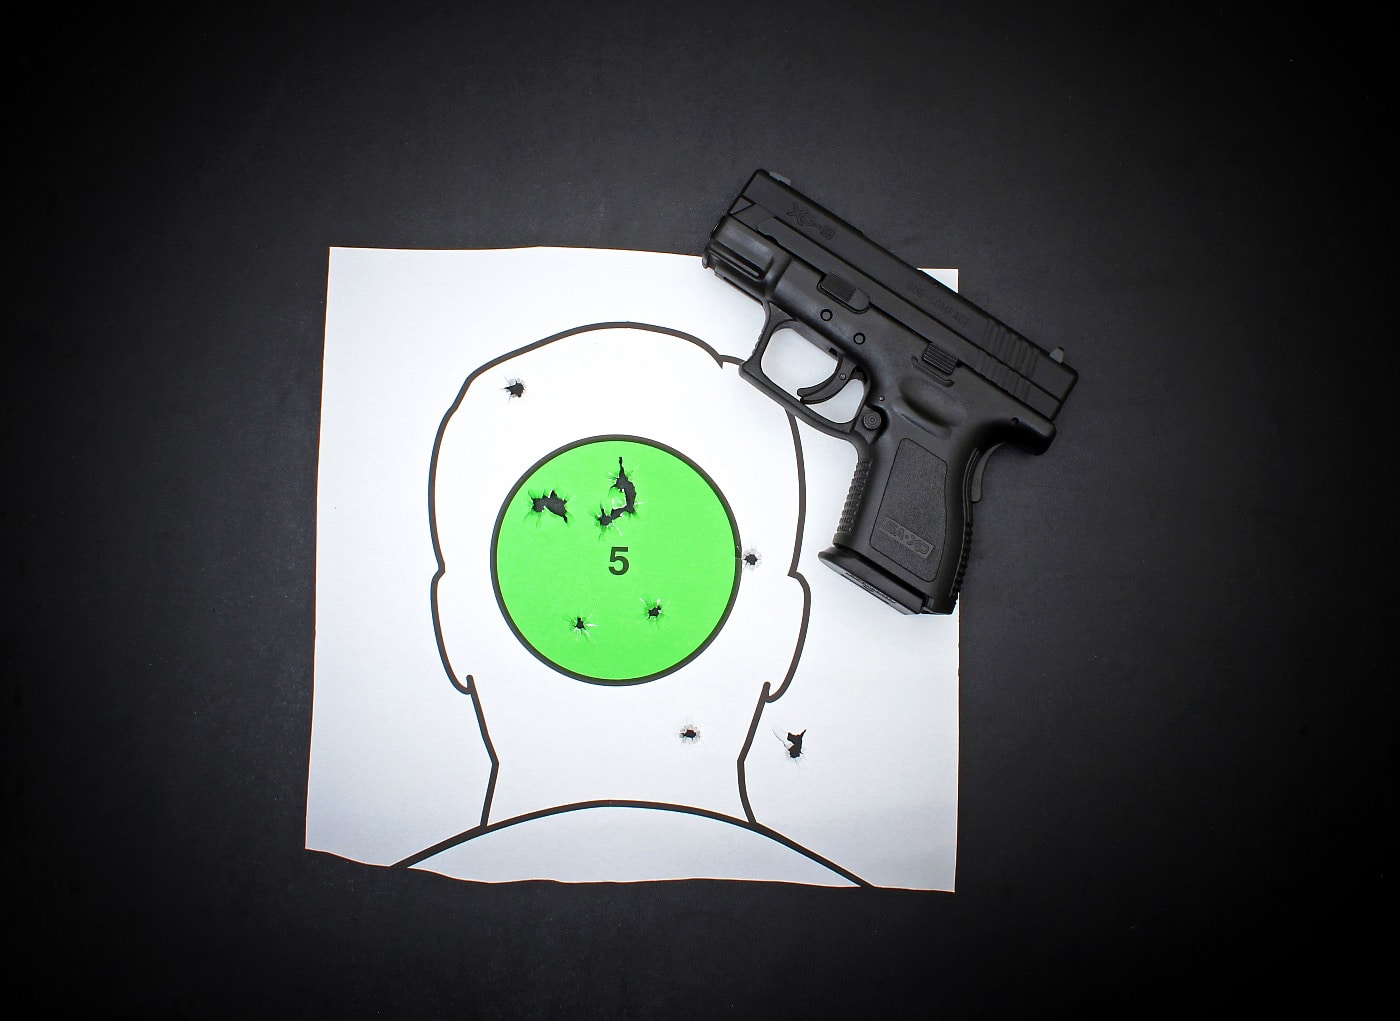 In this photo we see a target with the Springfield XD9 subcompact pistol.